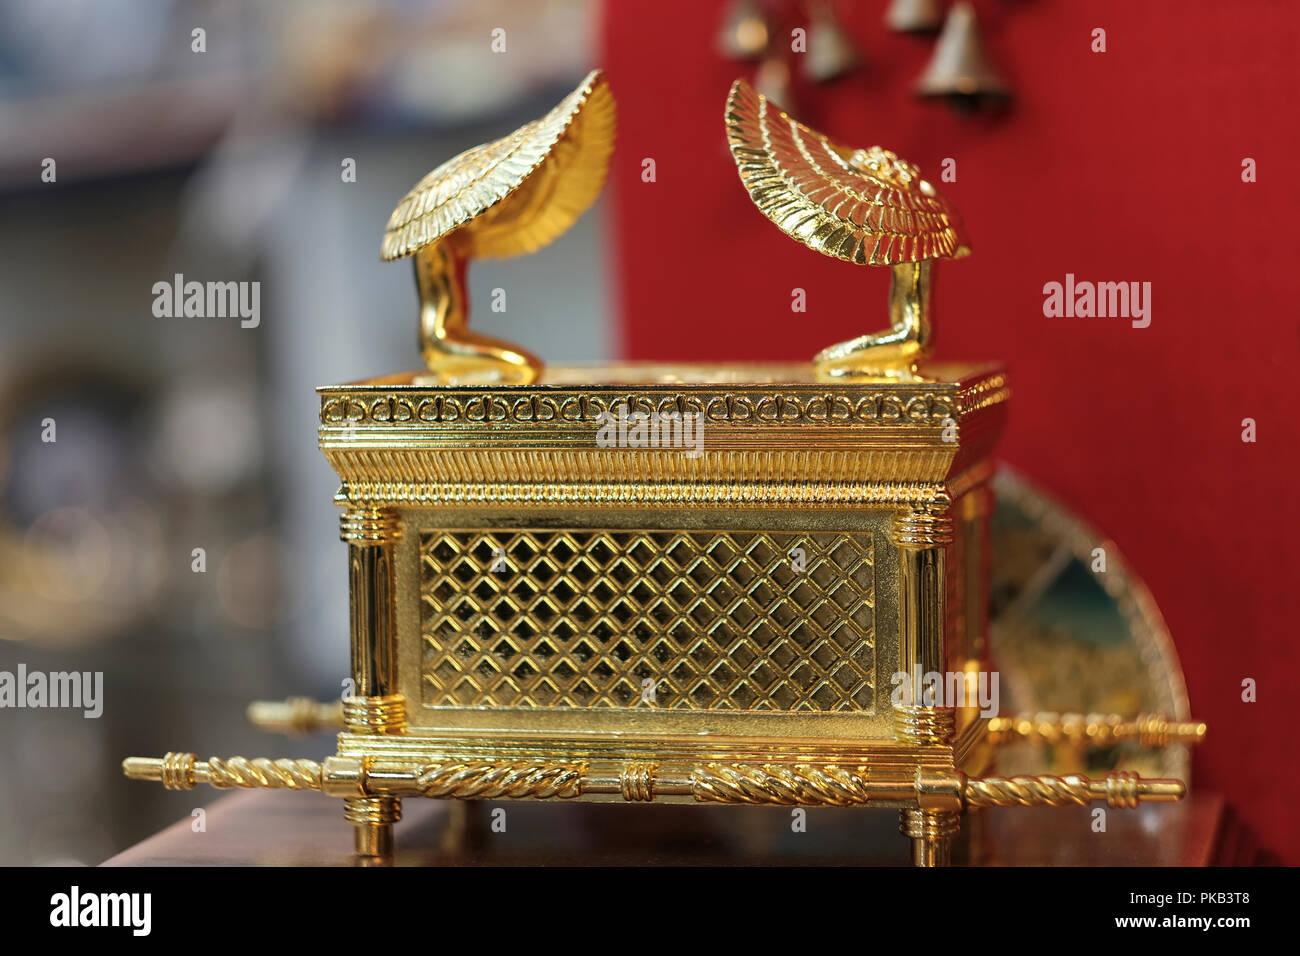 A plastic model of the biblical Ark of the Covenant or Testimony, described in the Book of Exodus as containing the Tablets of Stone on which the Ten Commandments were inscribed for sale in a souvenir shop in the bazzar of the old city East Jerusalem Israel Stock Photo